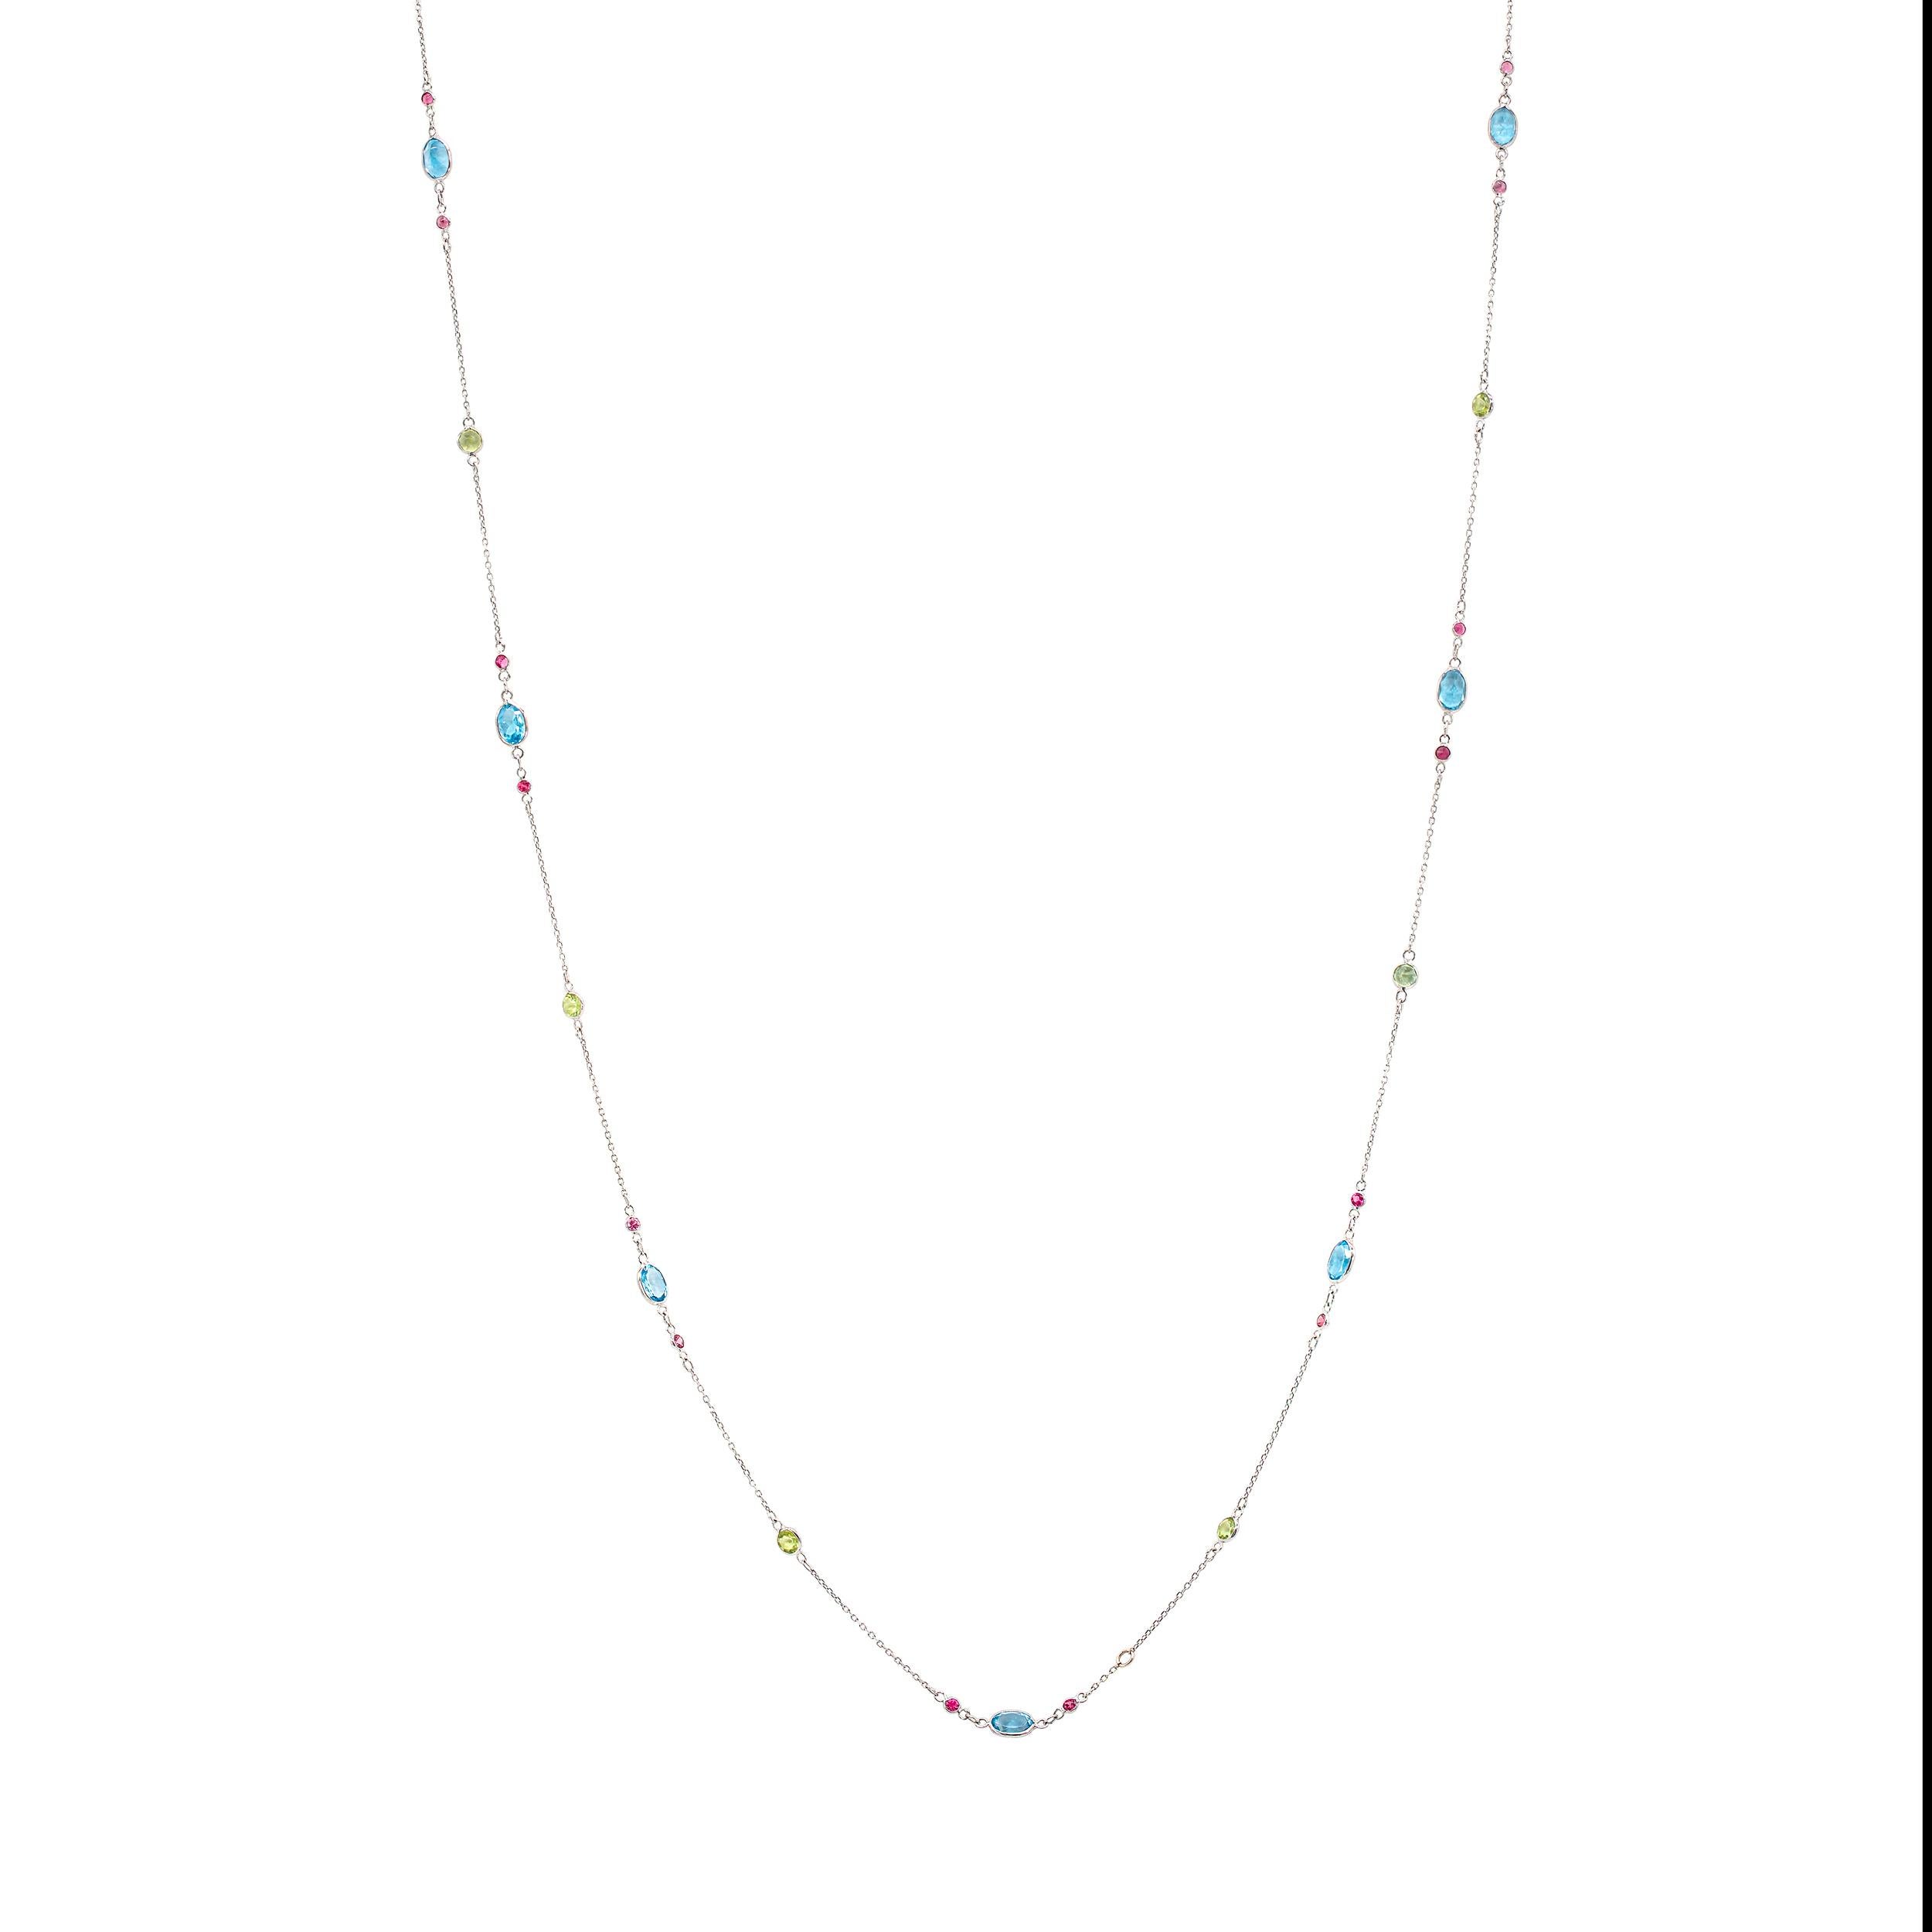 With the combination of 8 different colors of gemstones, there is a feeling of playfulness and fun, which is why we decided to call this set Clementine. This pendant and coordinating necklace are light, airy and nothing short of joyful. The long